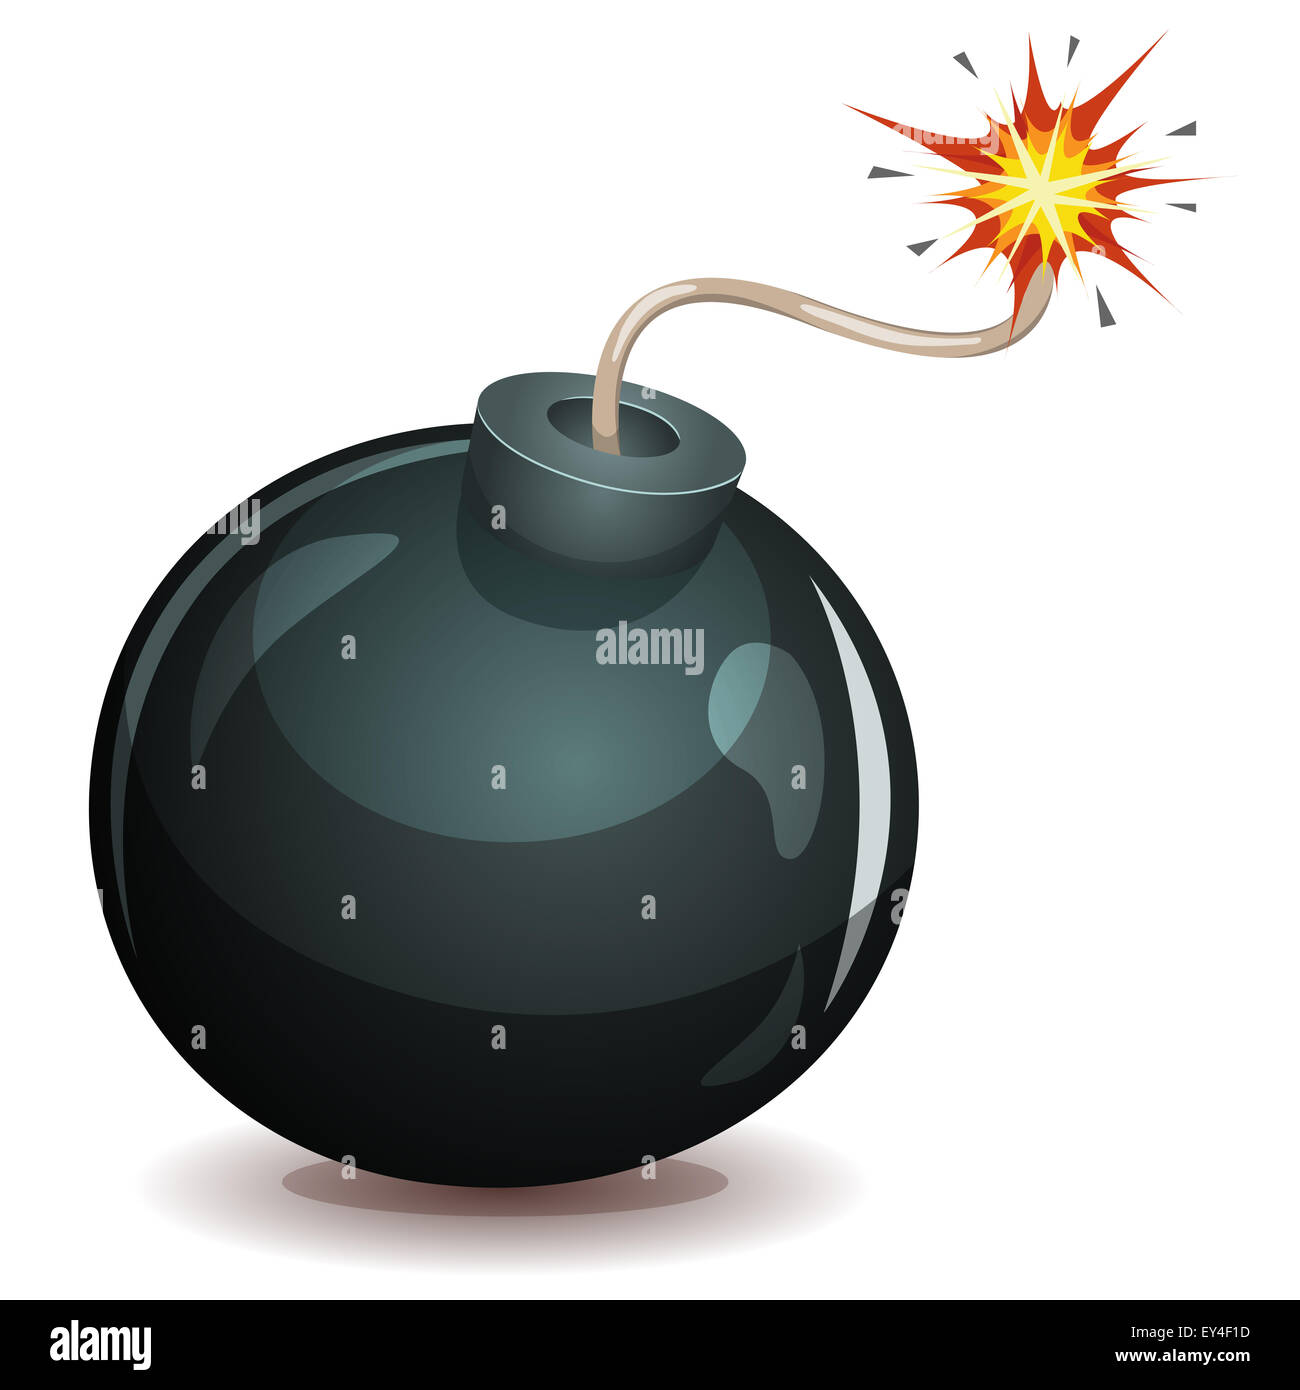 Illustration of a cartoon black bomb icon about to explode with burning wick, isolated on white Stock Photo